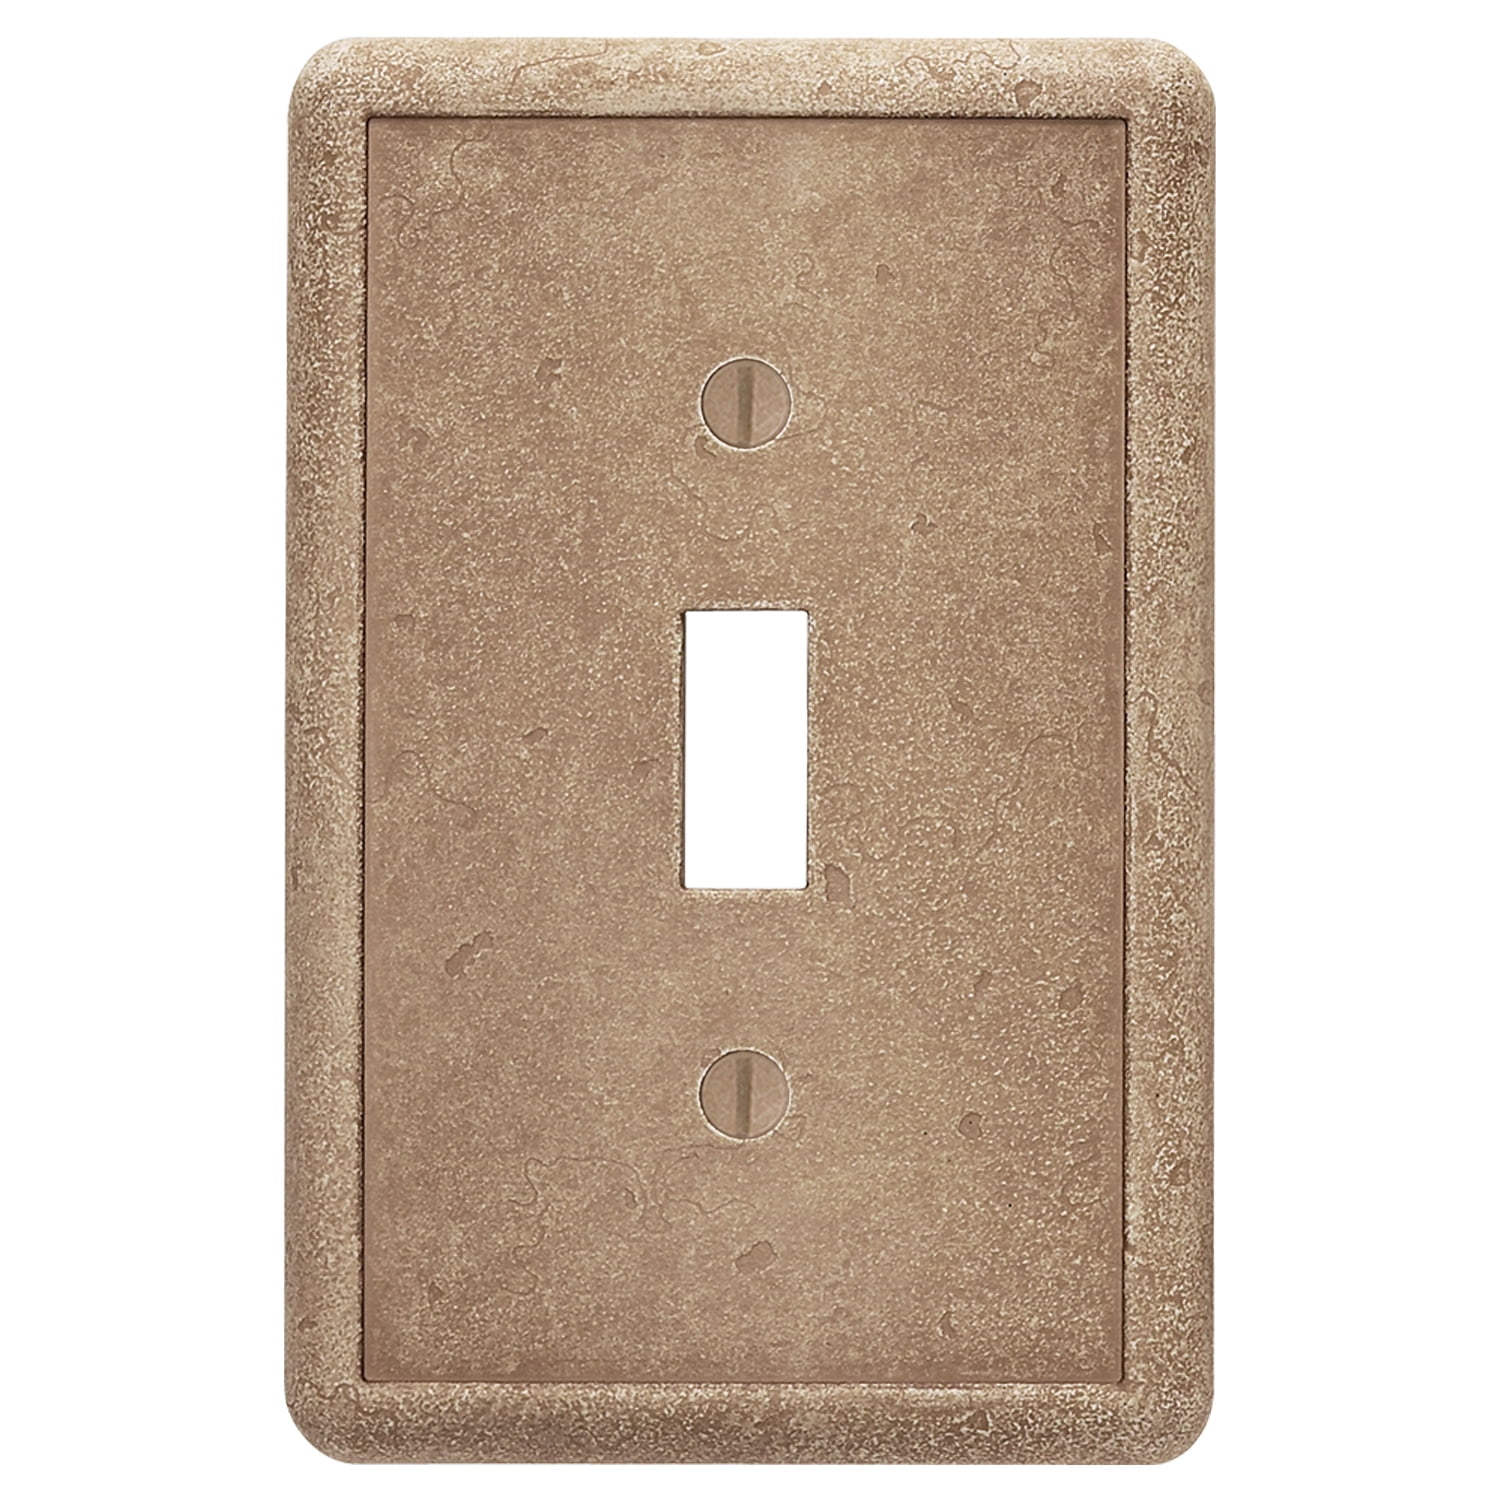 Gray Light Switch Cover Cast Stone Tumbled Textured Outlet Cover Wall Plate Single Rocker 3 Pack 